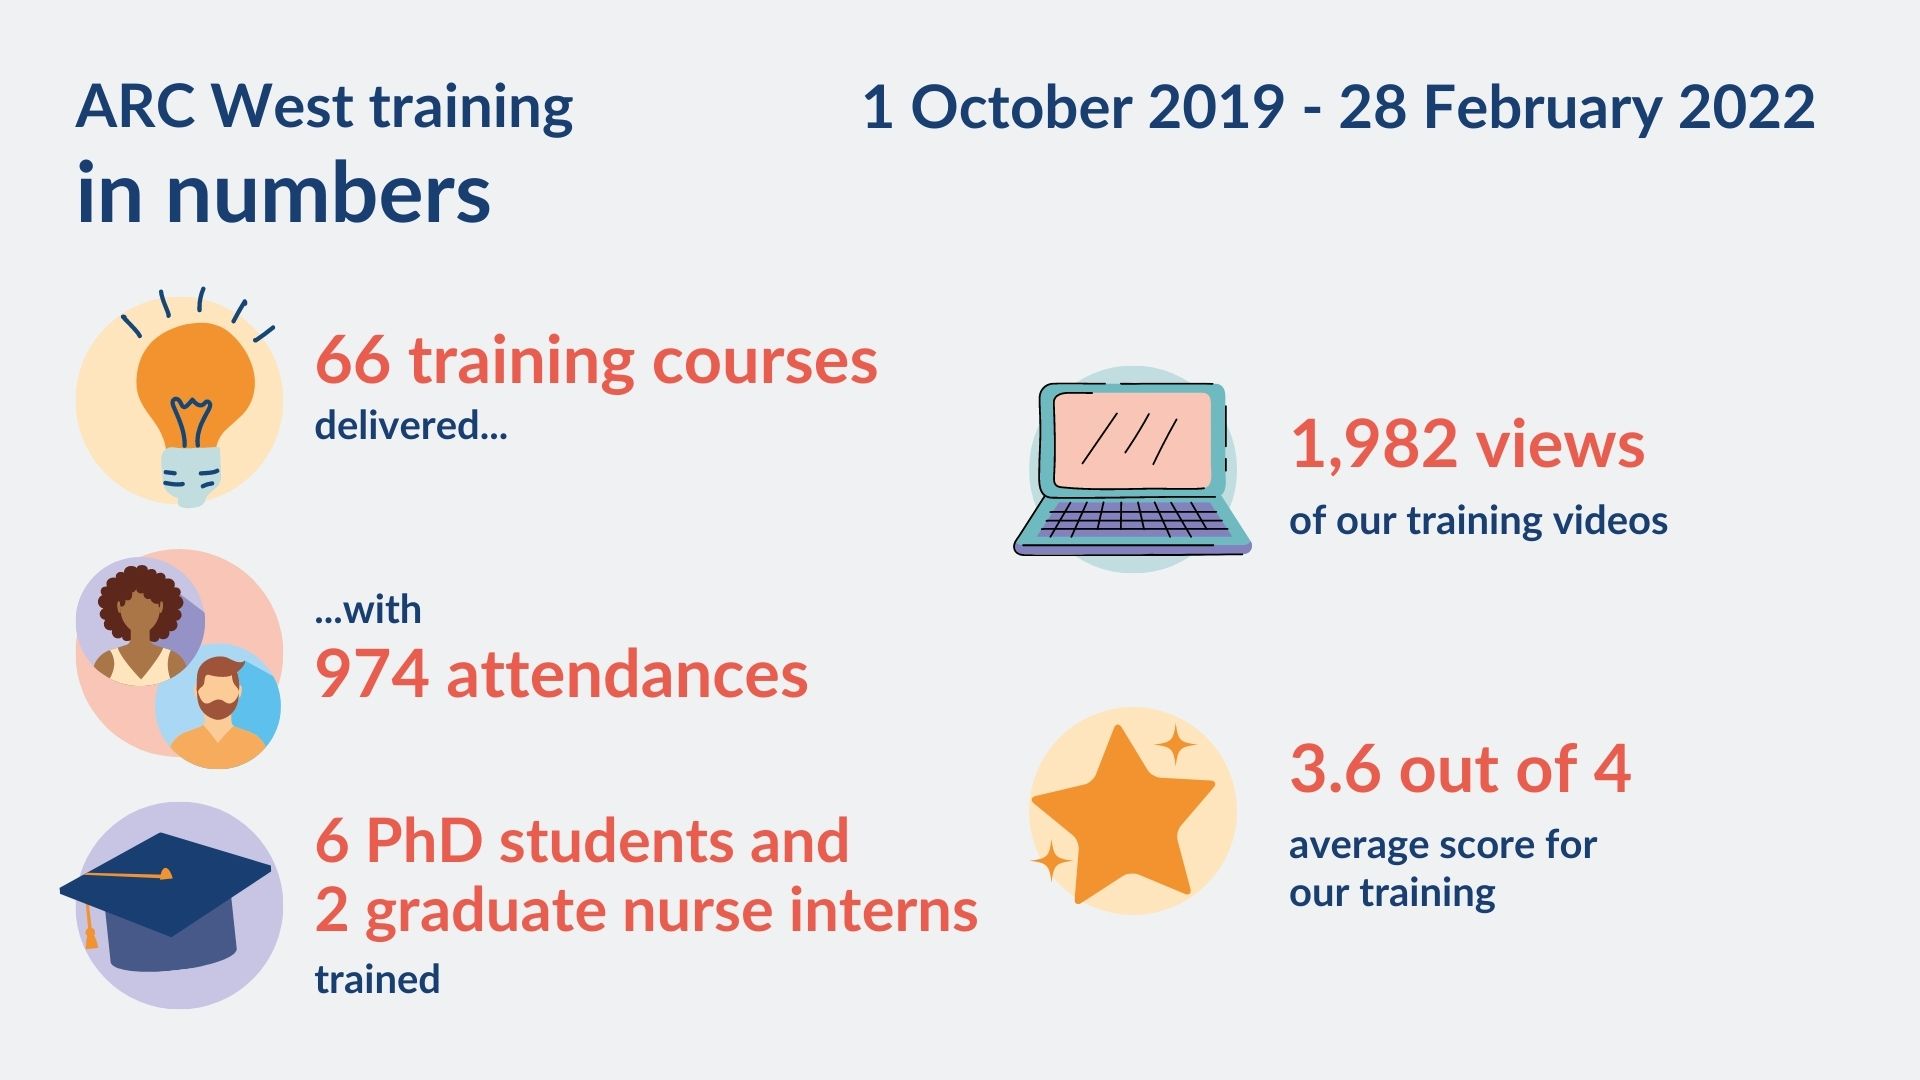 ARC West training in numbers